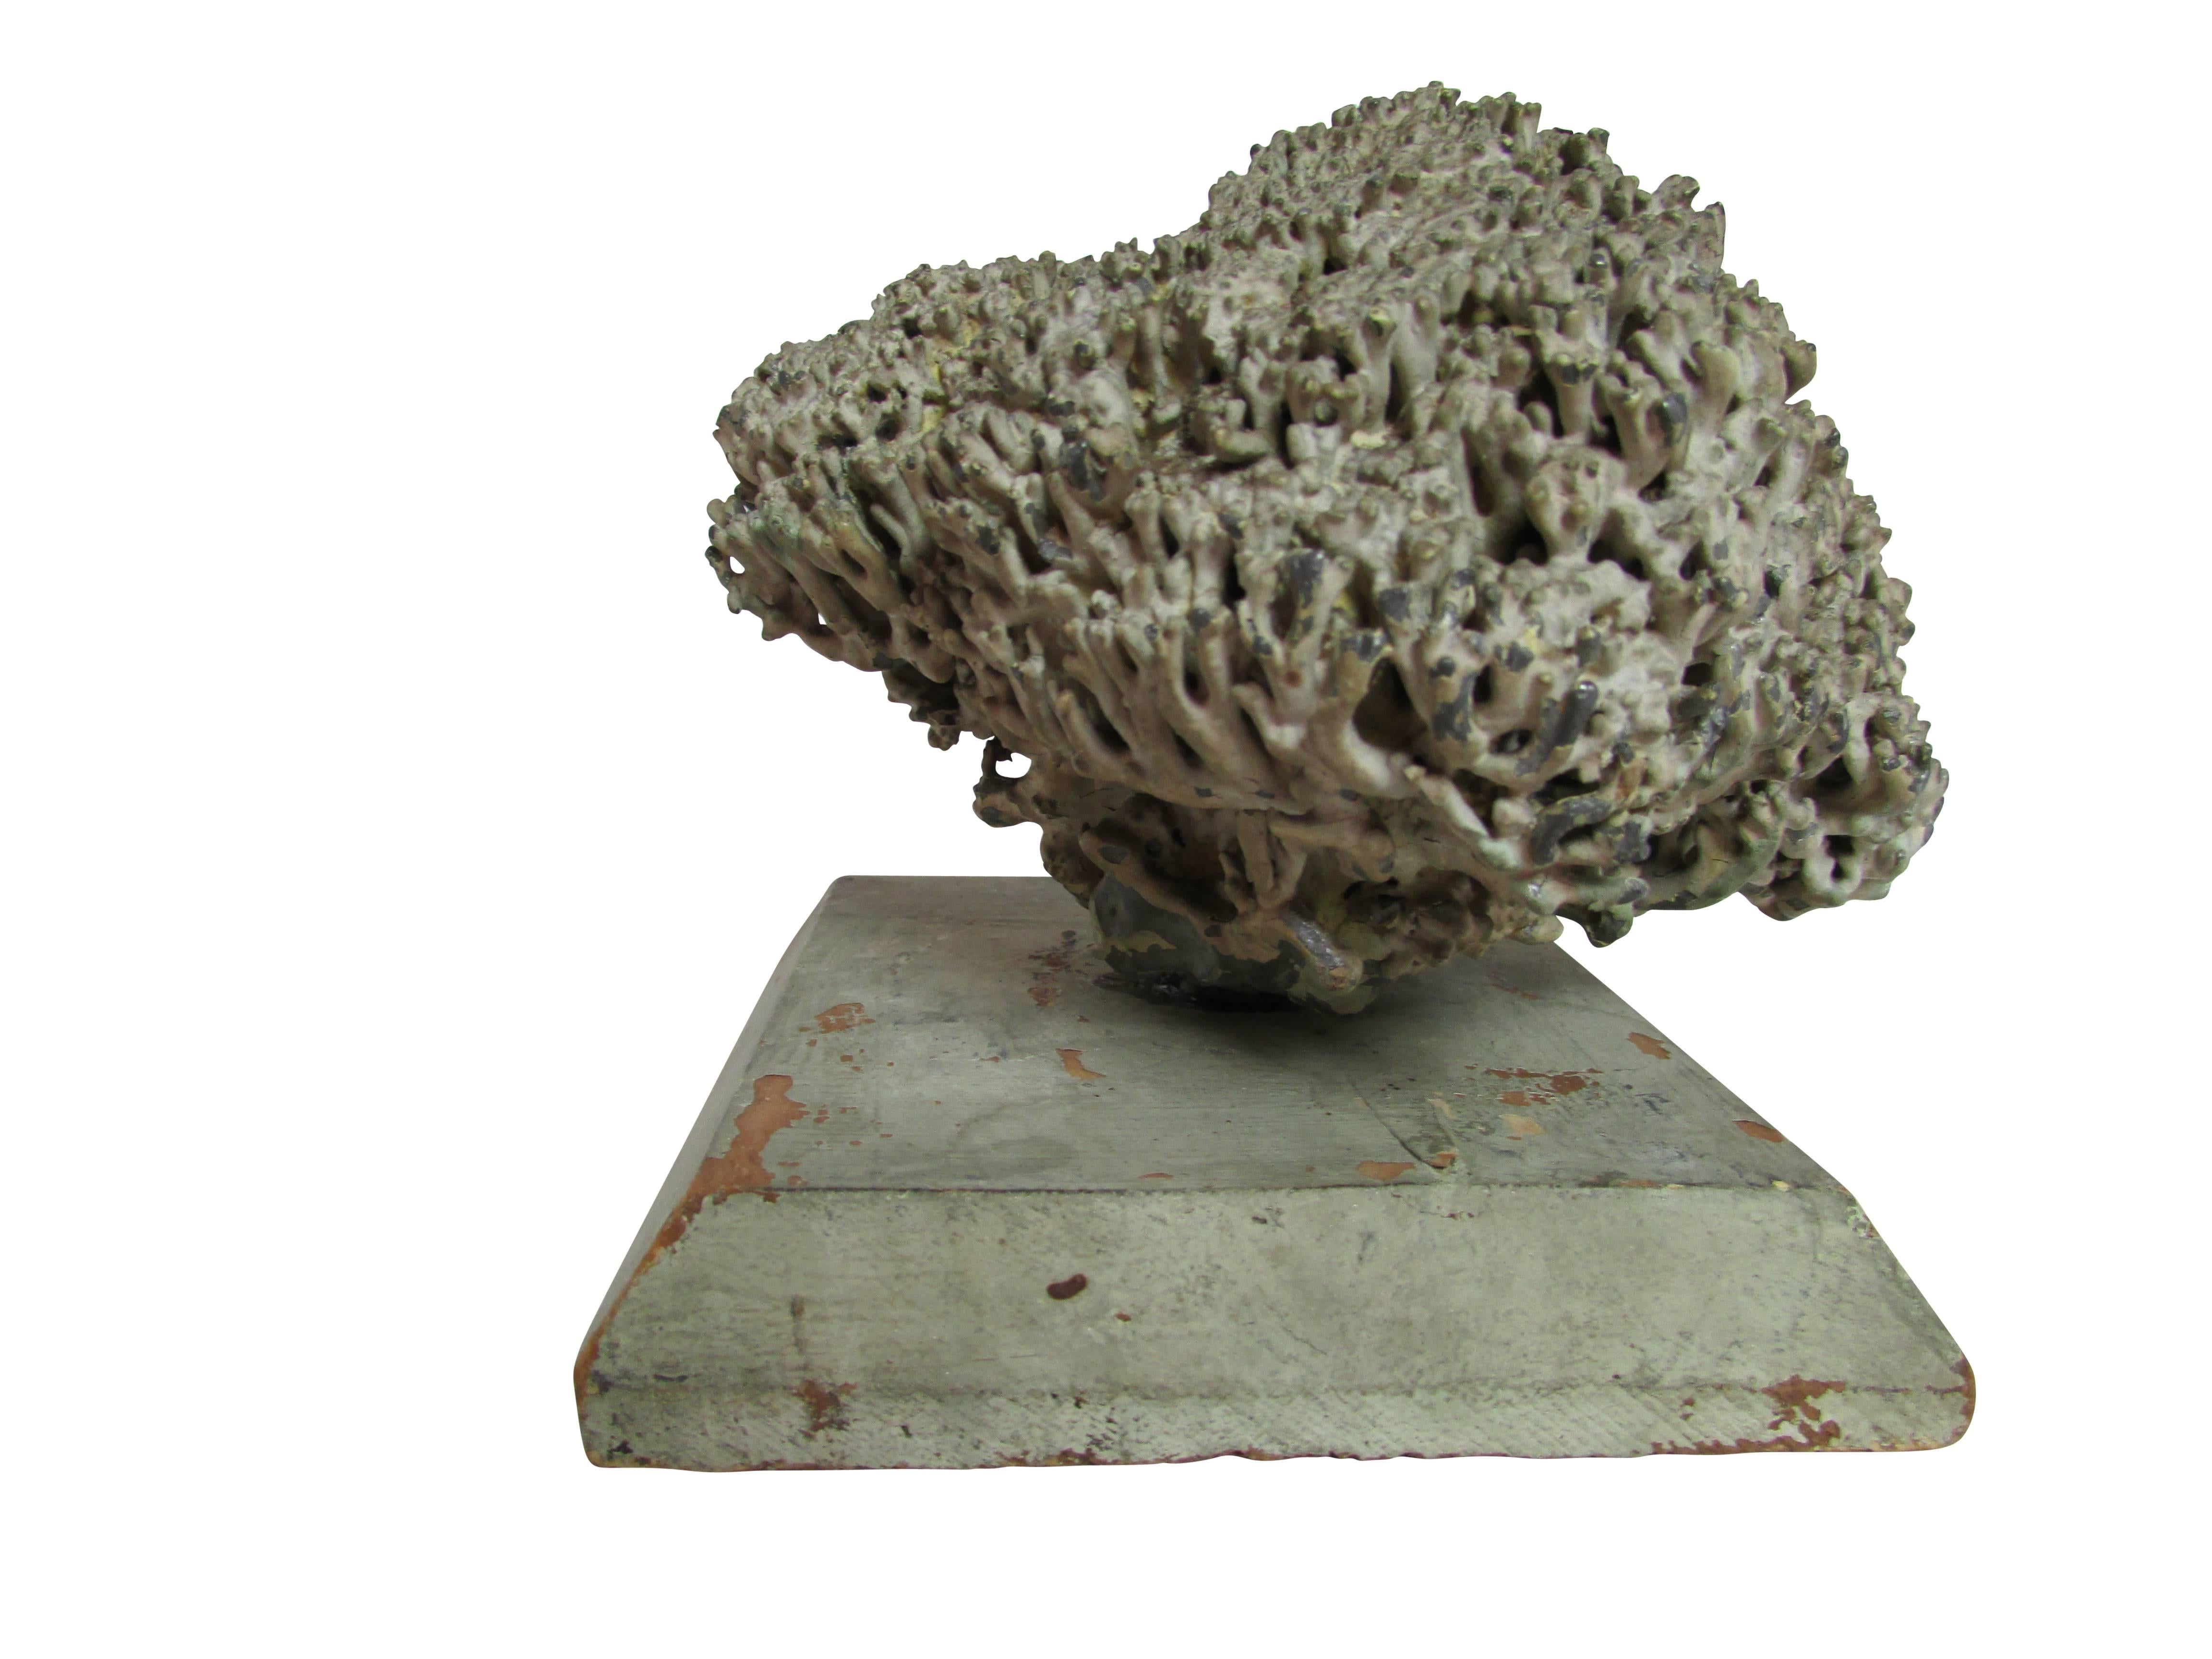 This is a wonderful lead sculpture of a coral specimen mounted to a painted wood stand.